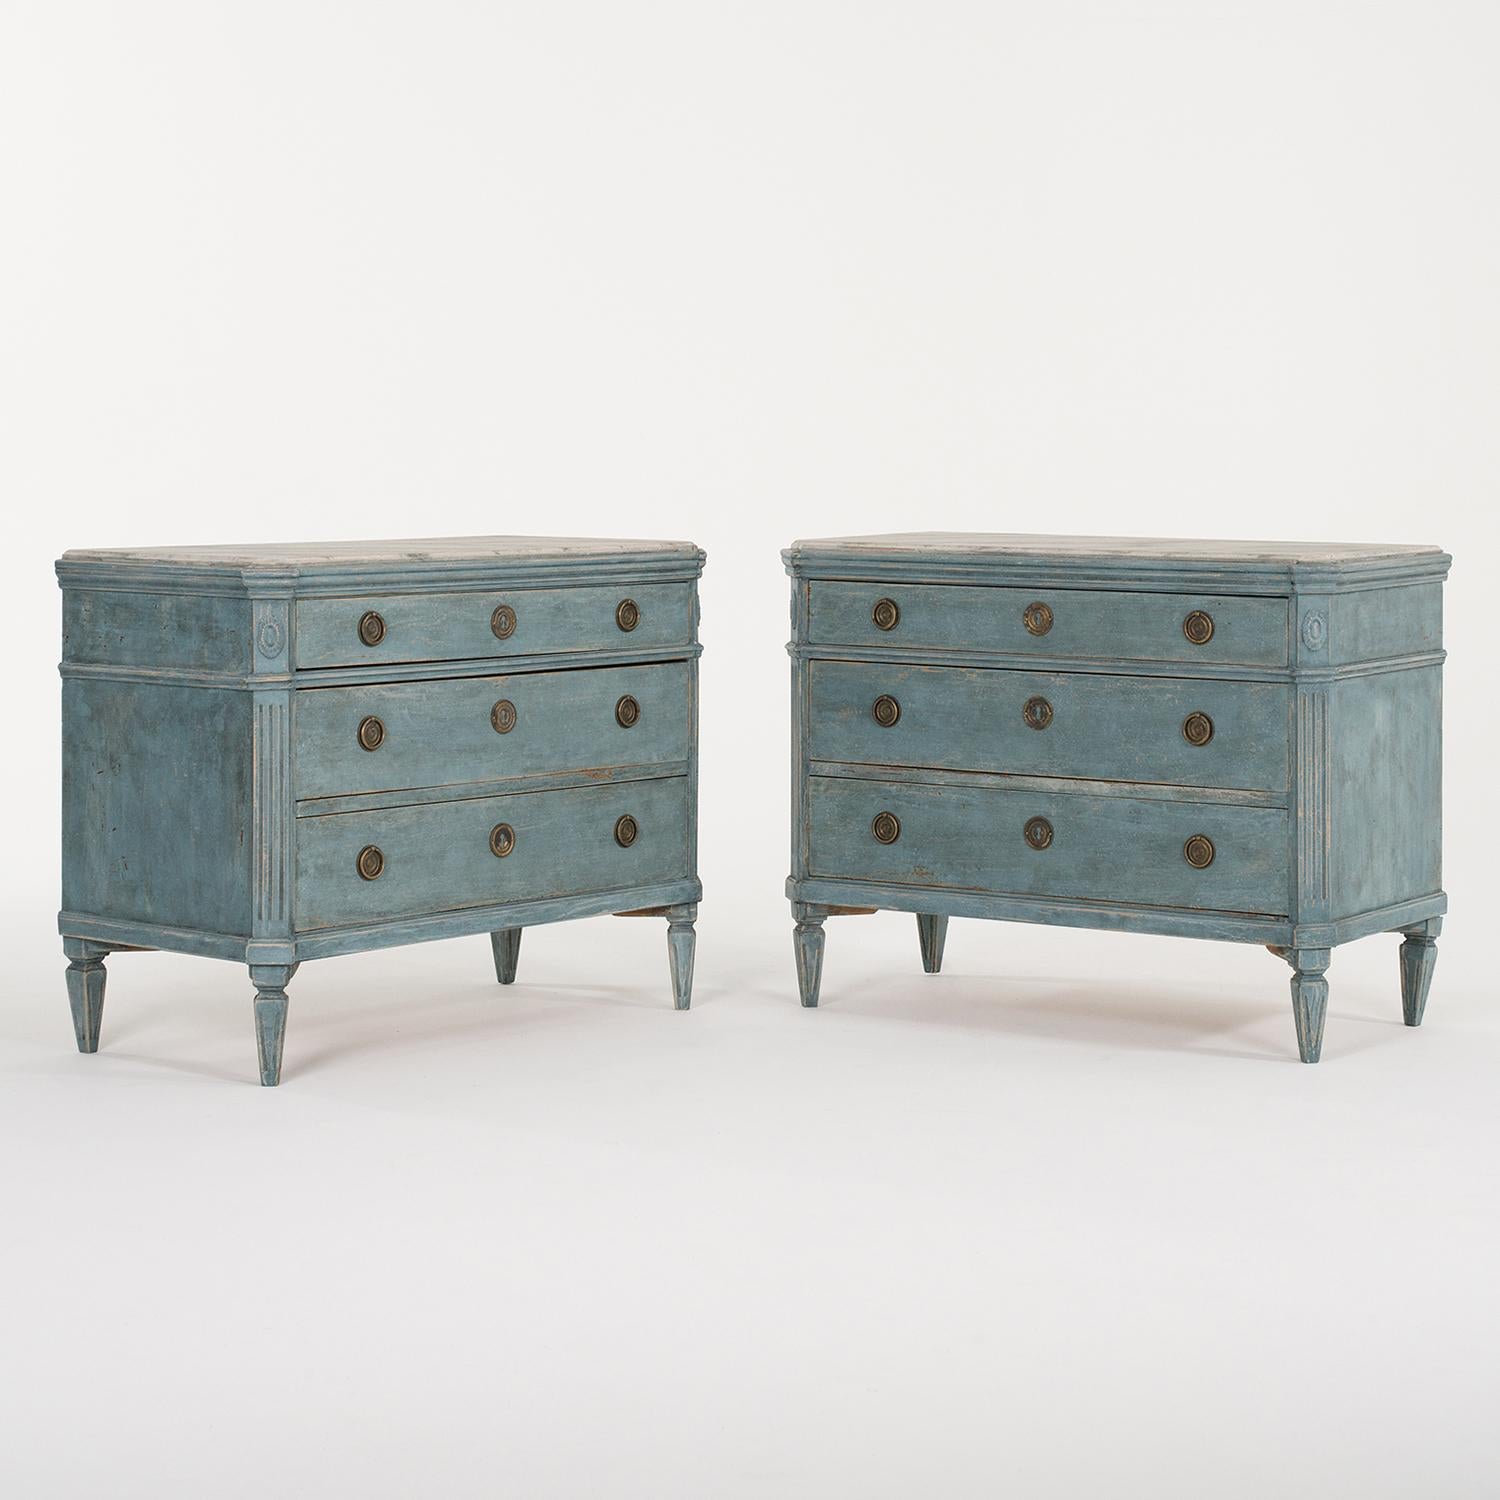 A 19th Century, light-blue antique Swedish Gustavian pair of chests made of hand crafted painted Pinewood with two large drawers and one small one, in good condition. The Scandinavian cabinets are composed with a hand painted white faux marble top,